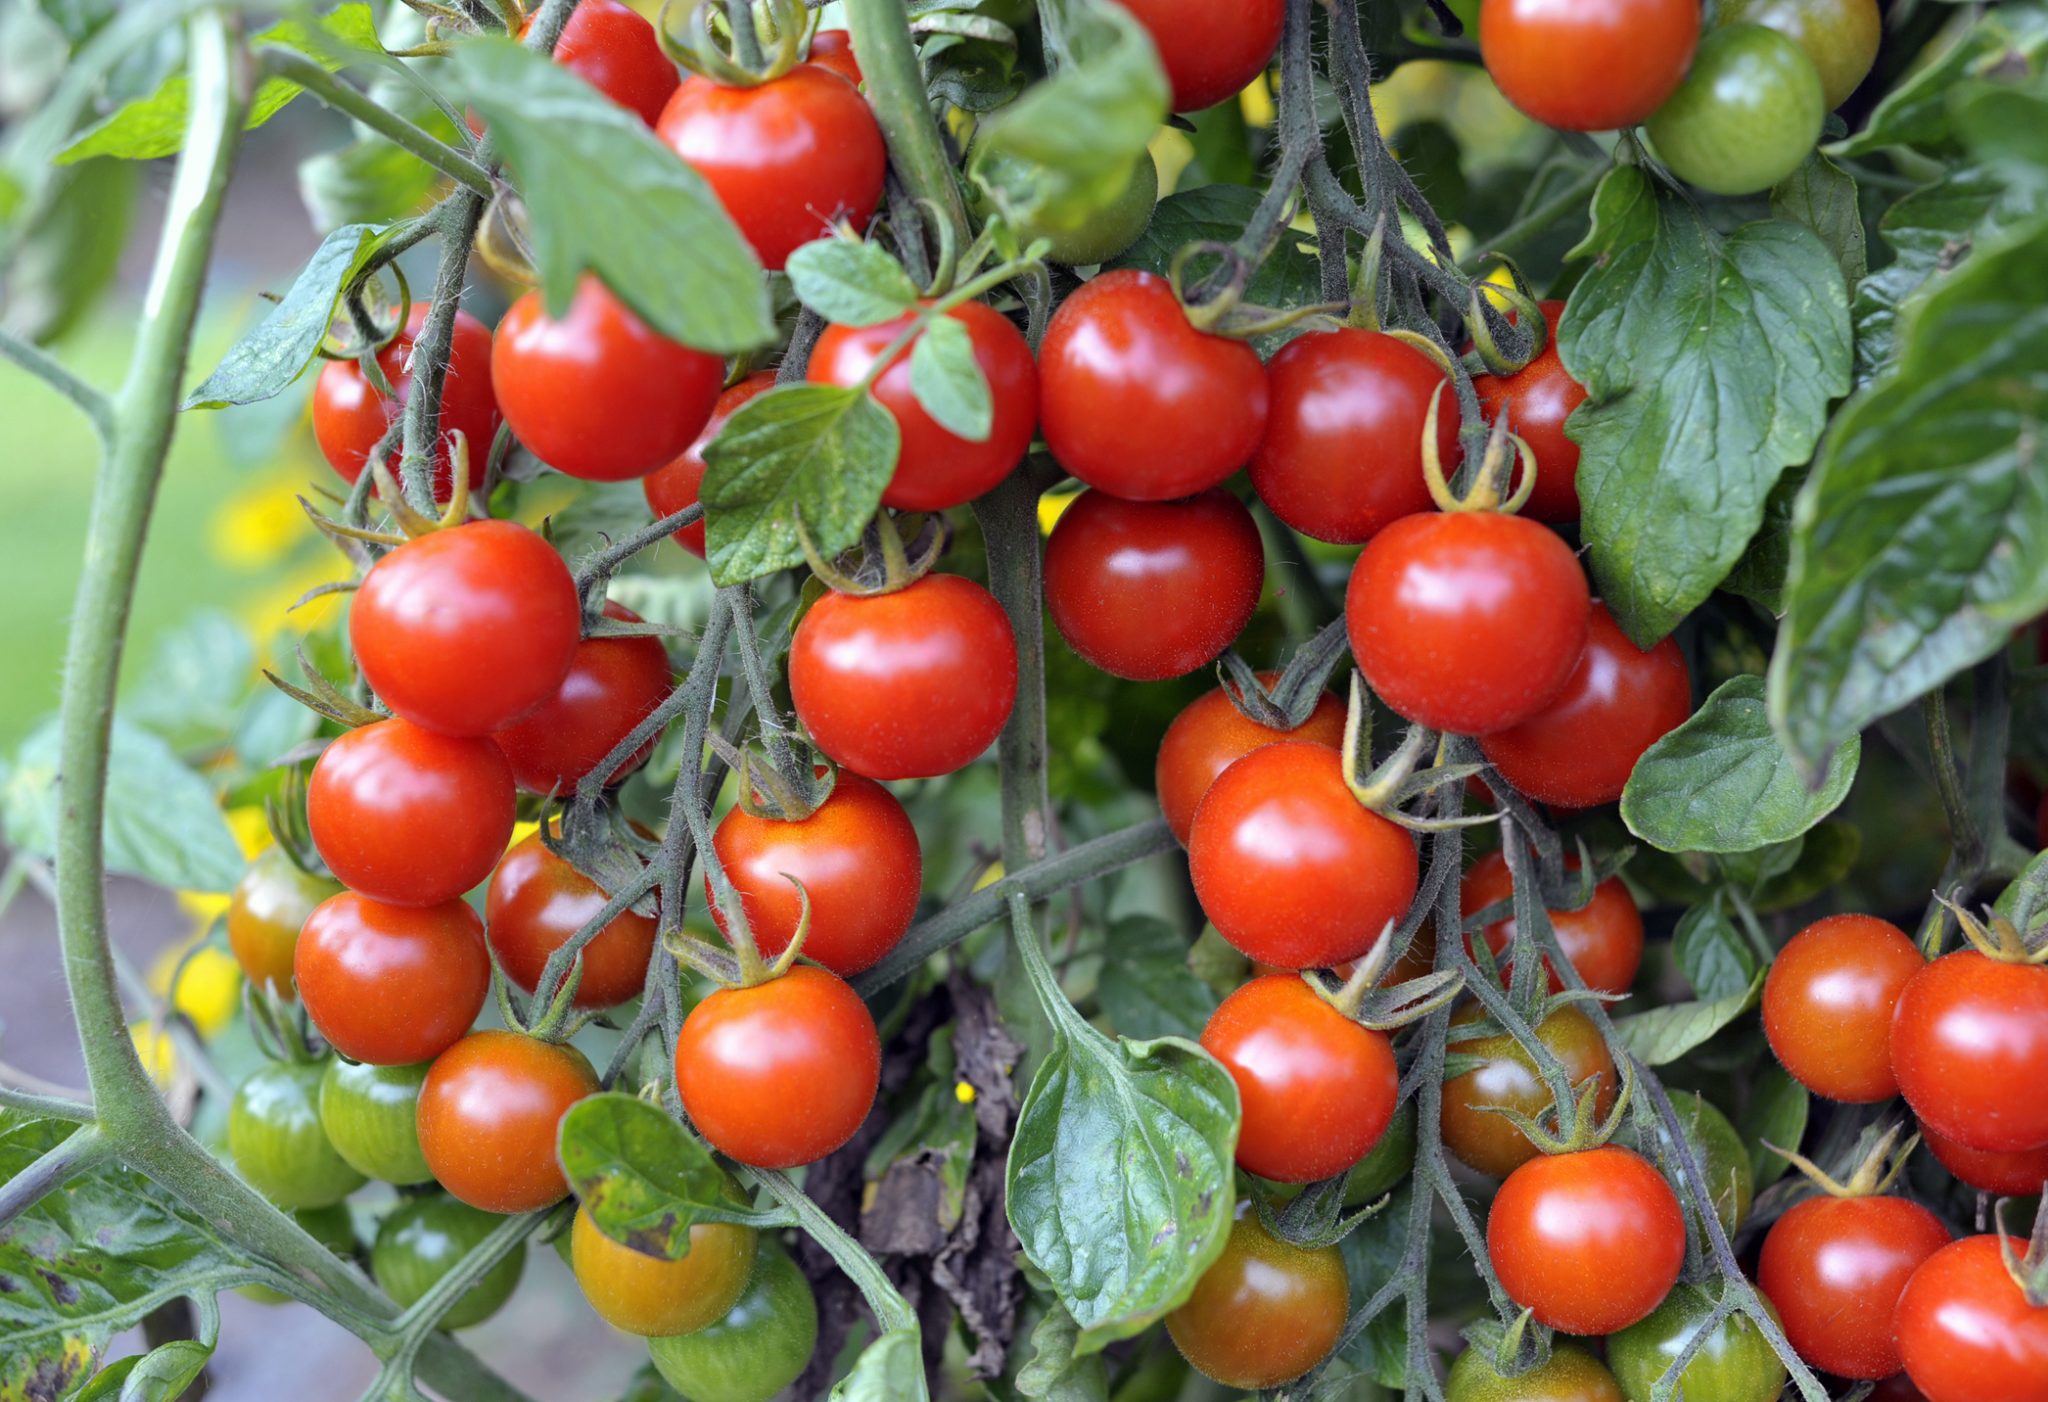 Cherry tomatoes ripening on the vine in a garden.